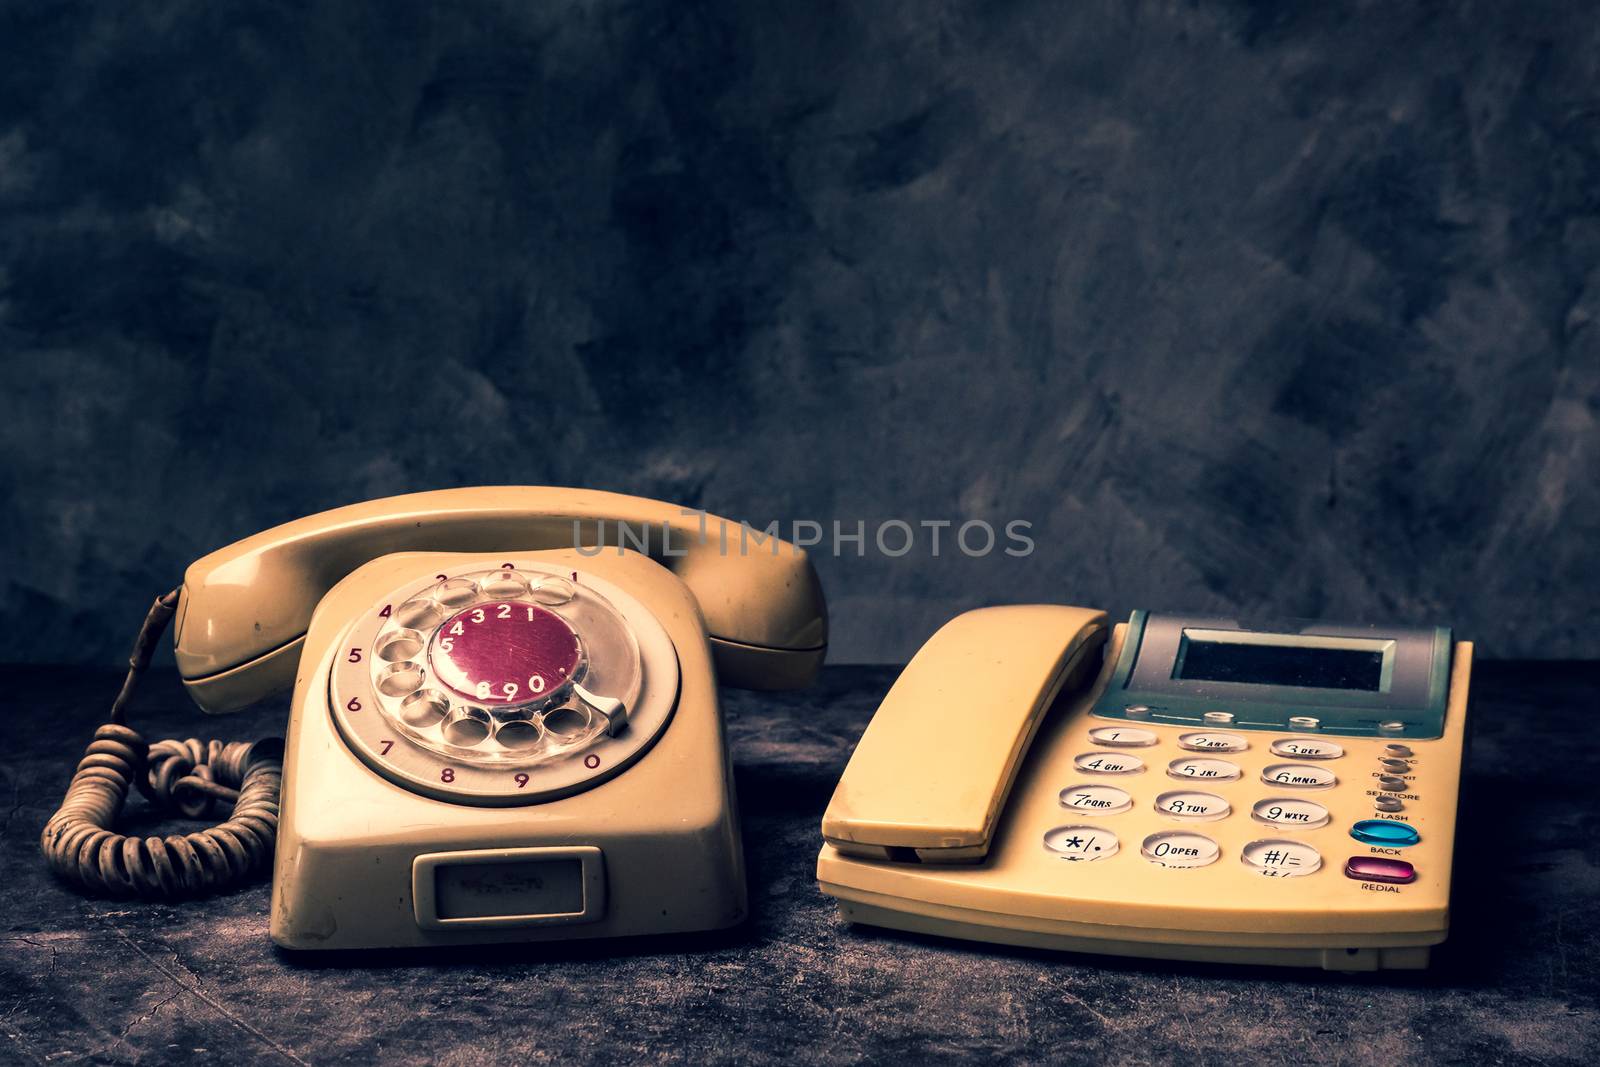 An old telephone with rotary dial and a landline on a grunge bac by ronnarong